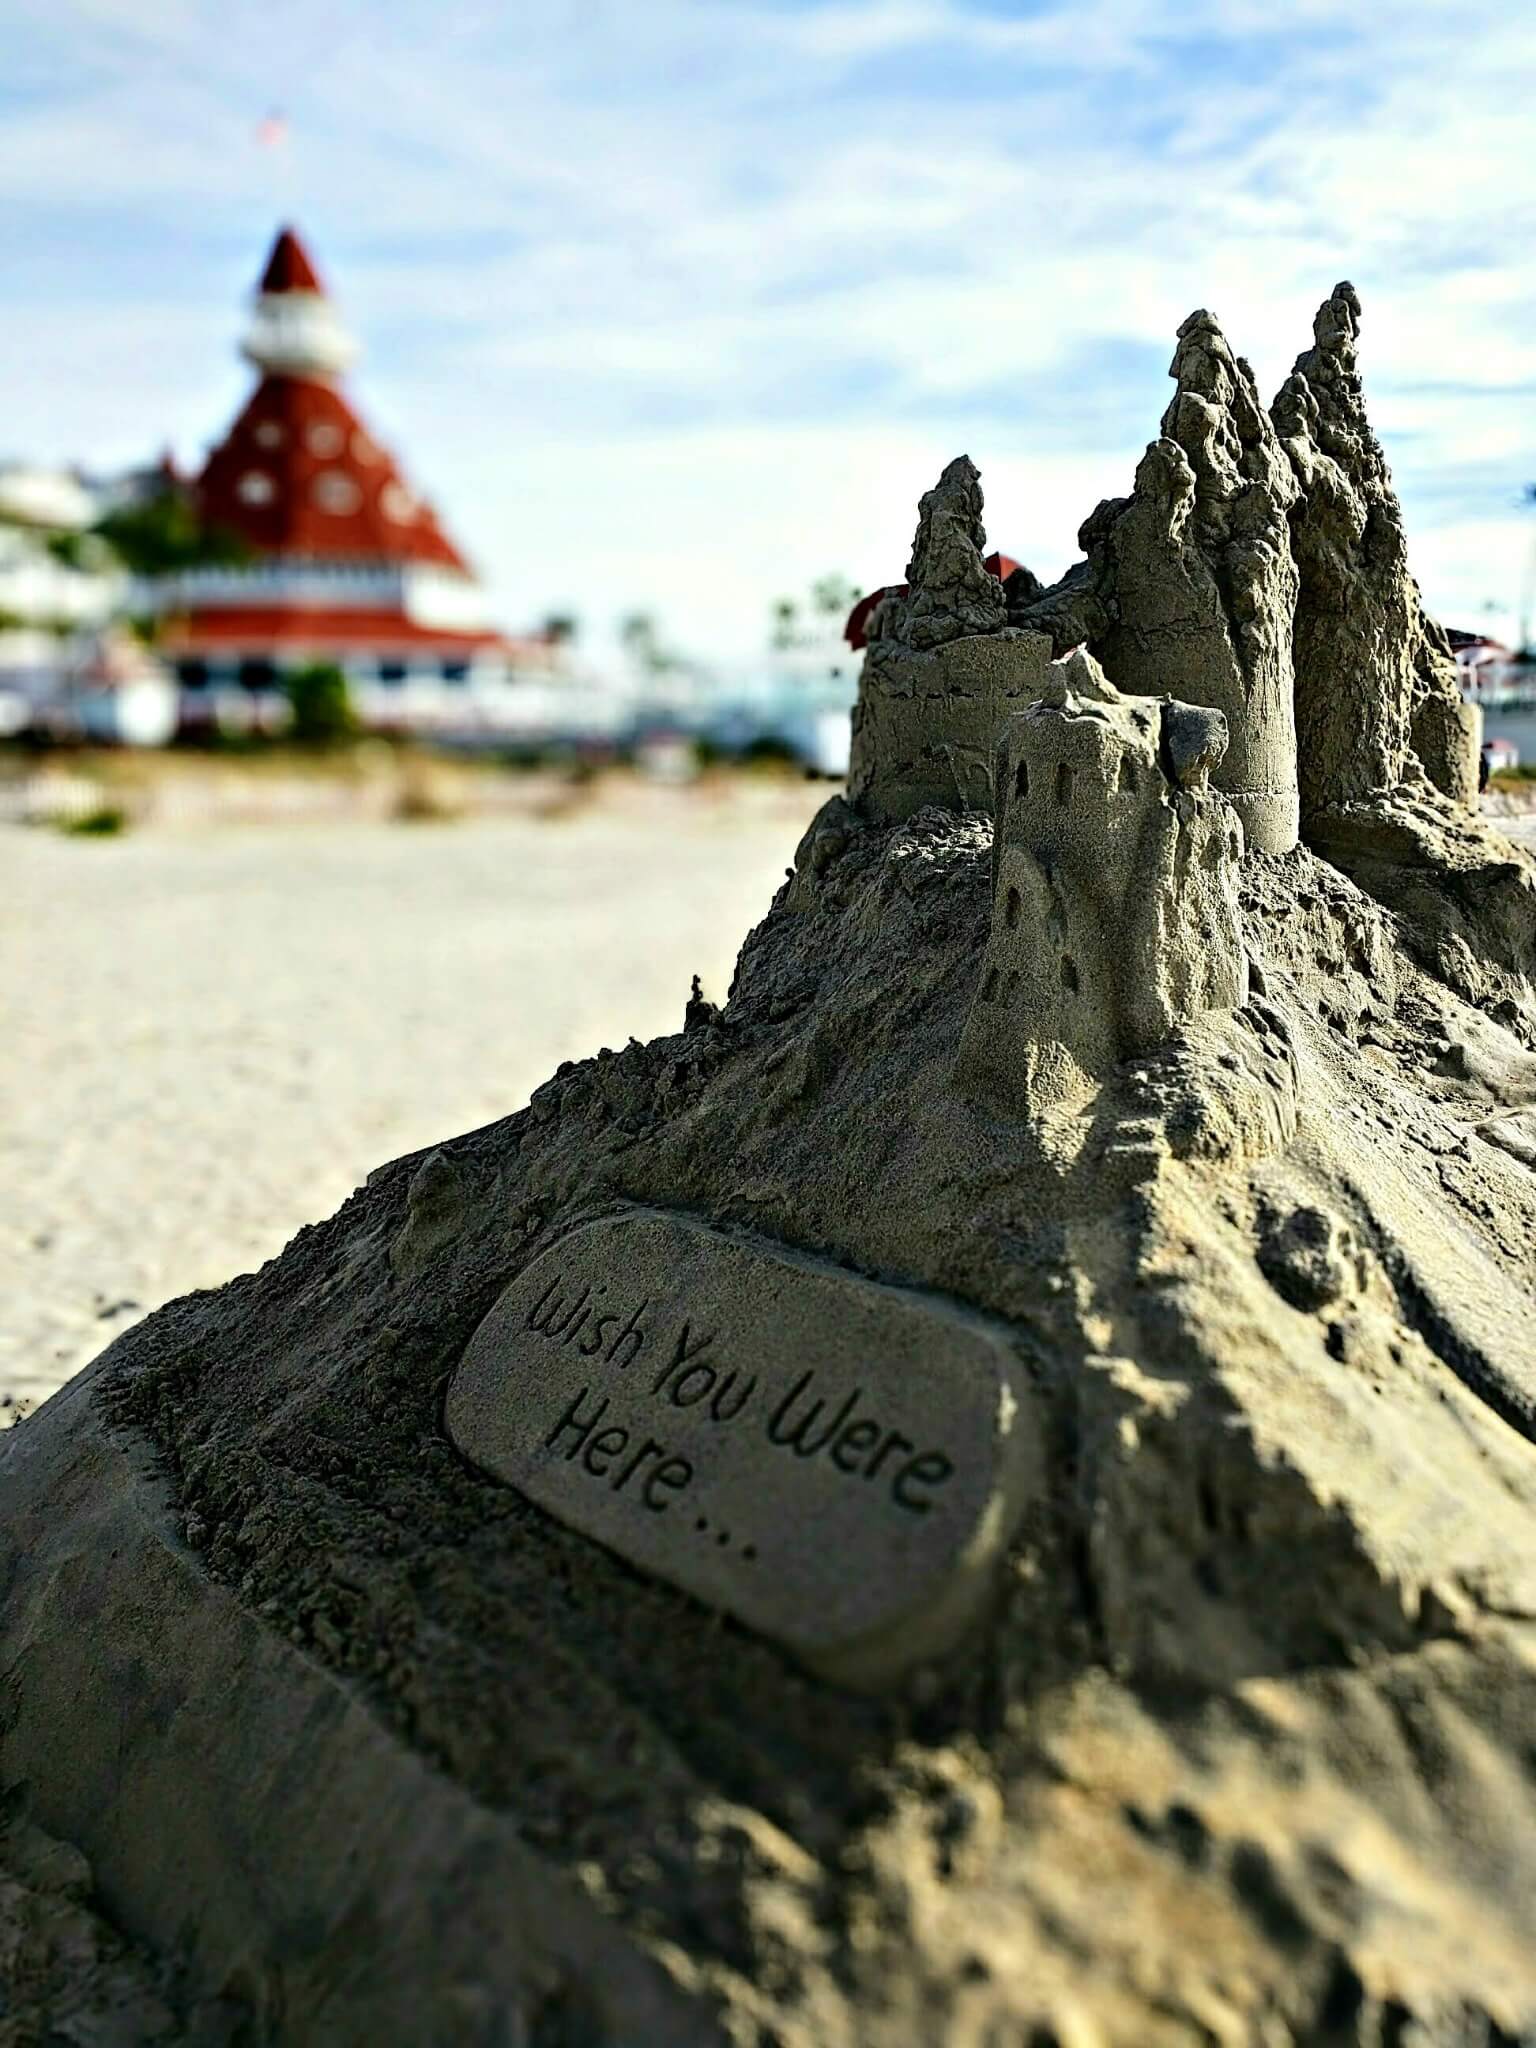 Sand castle with the Hotel Del Coronado in the background, December 2016